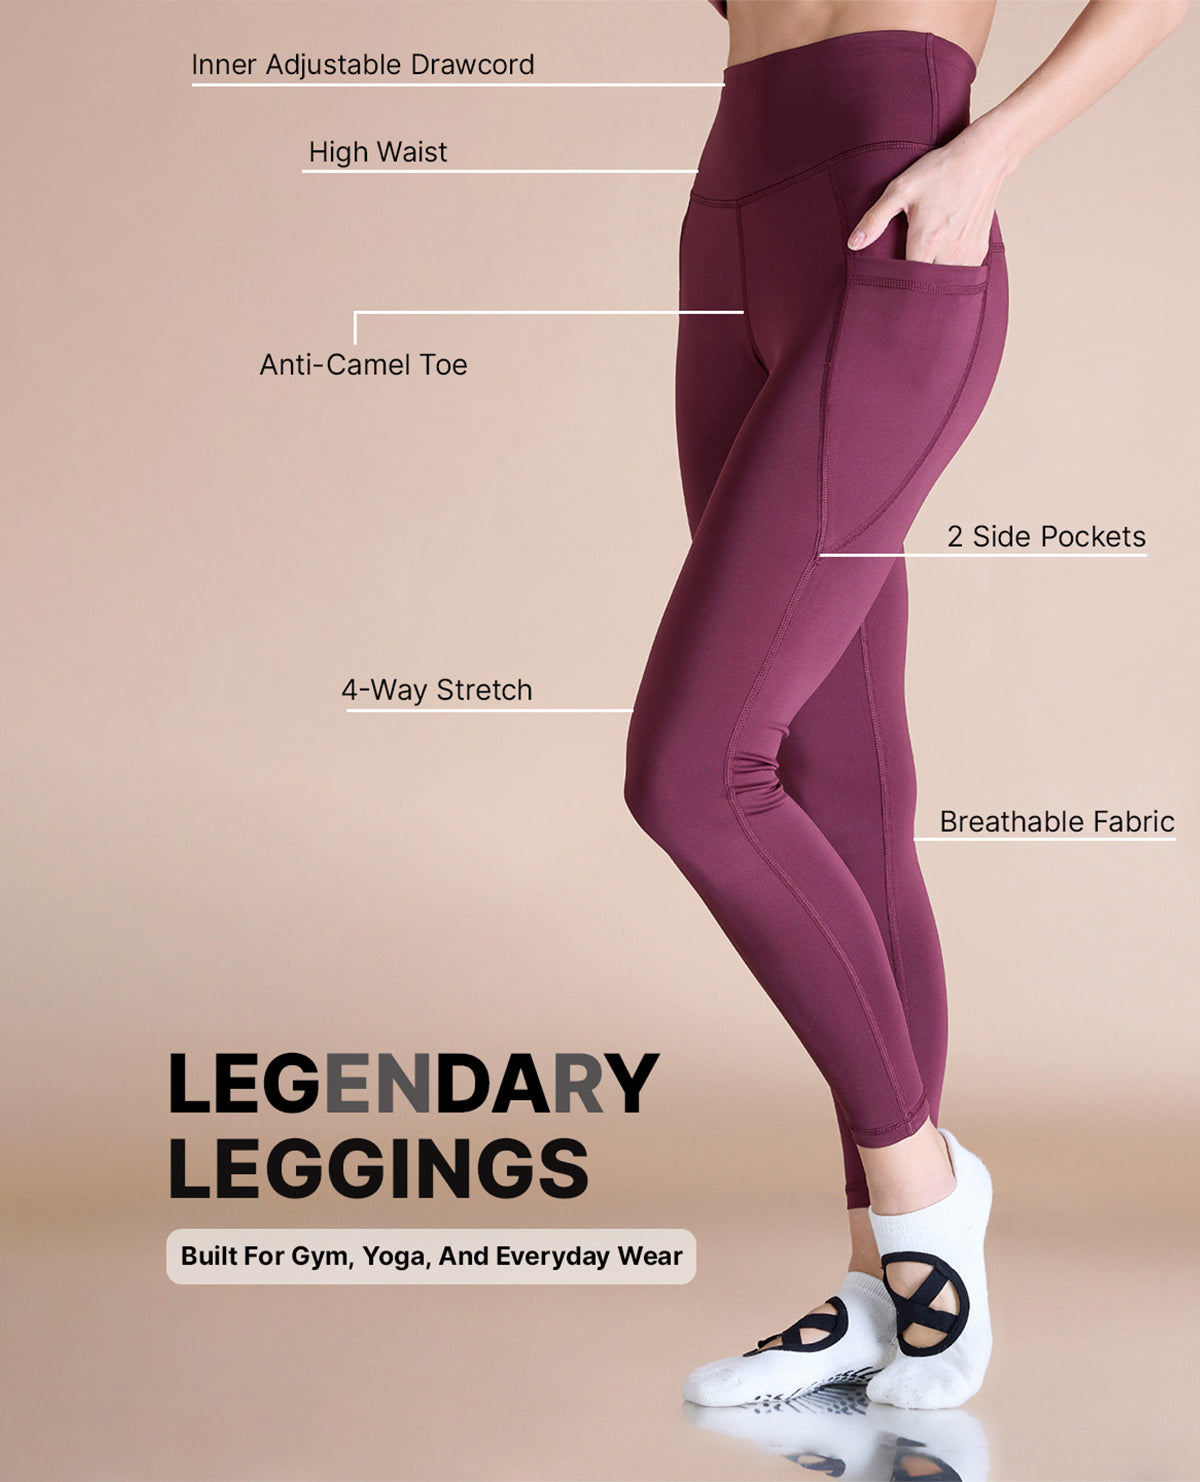 Women Cotton Stretchable Leggings with Pockets